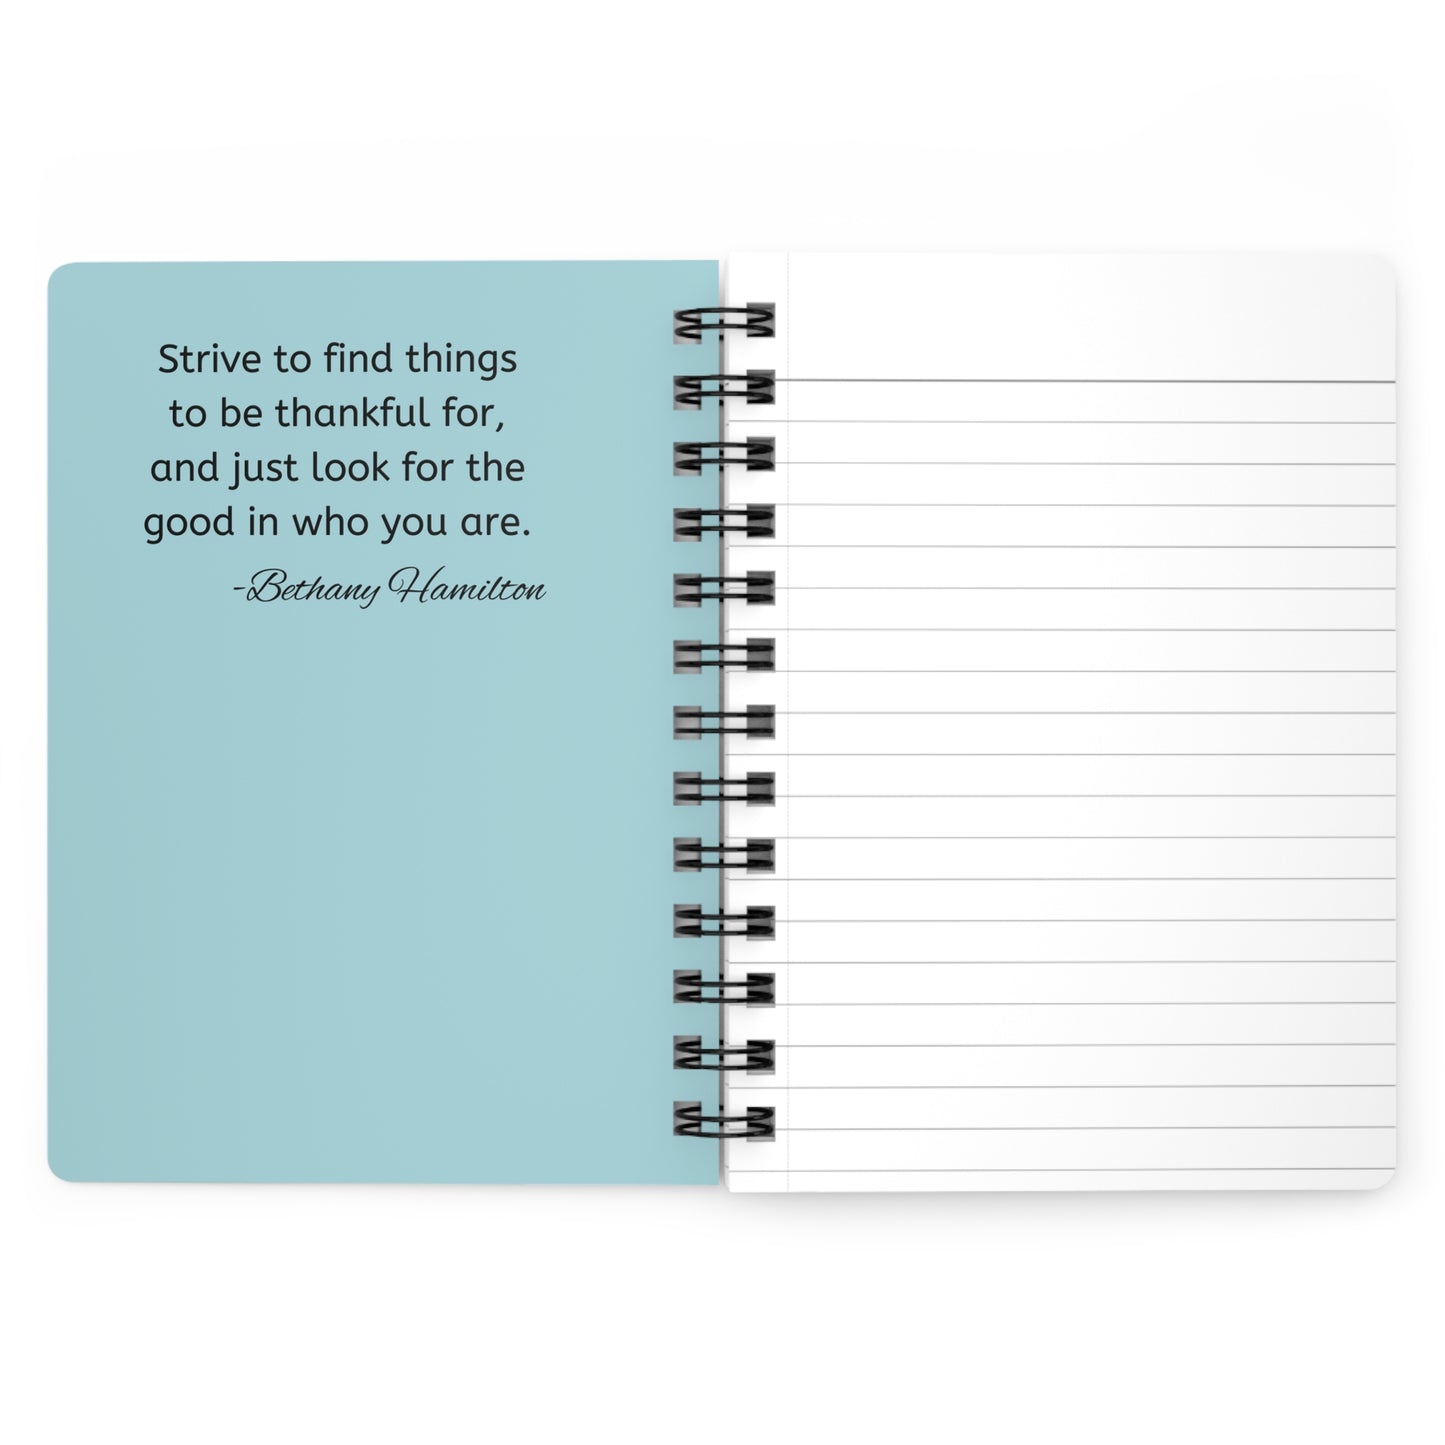 Today I Am Thankful For Journal - Spiral Bound Journal for Daily Thoughts, Gratitude, and Thankfulness, Notebook Gift, Journal Gift